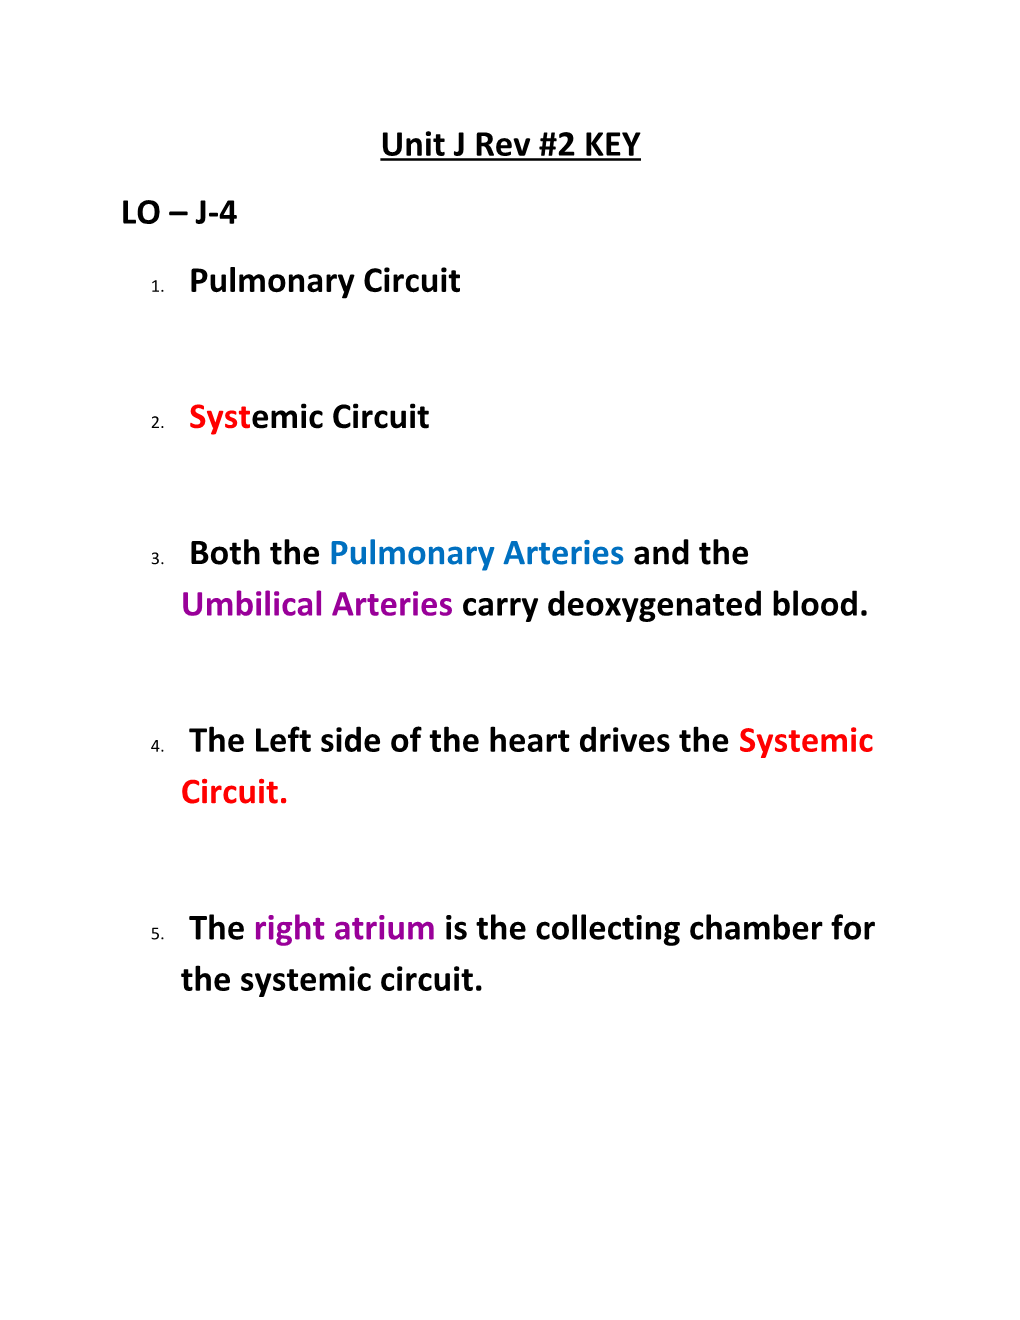 Both the Pulmonary Arteries and the Umbilical Arteries Carry Deoxygenated Blood